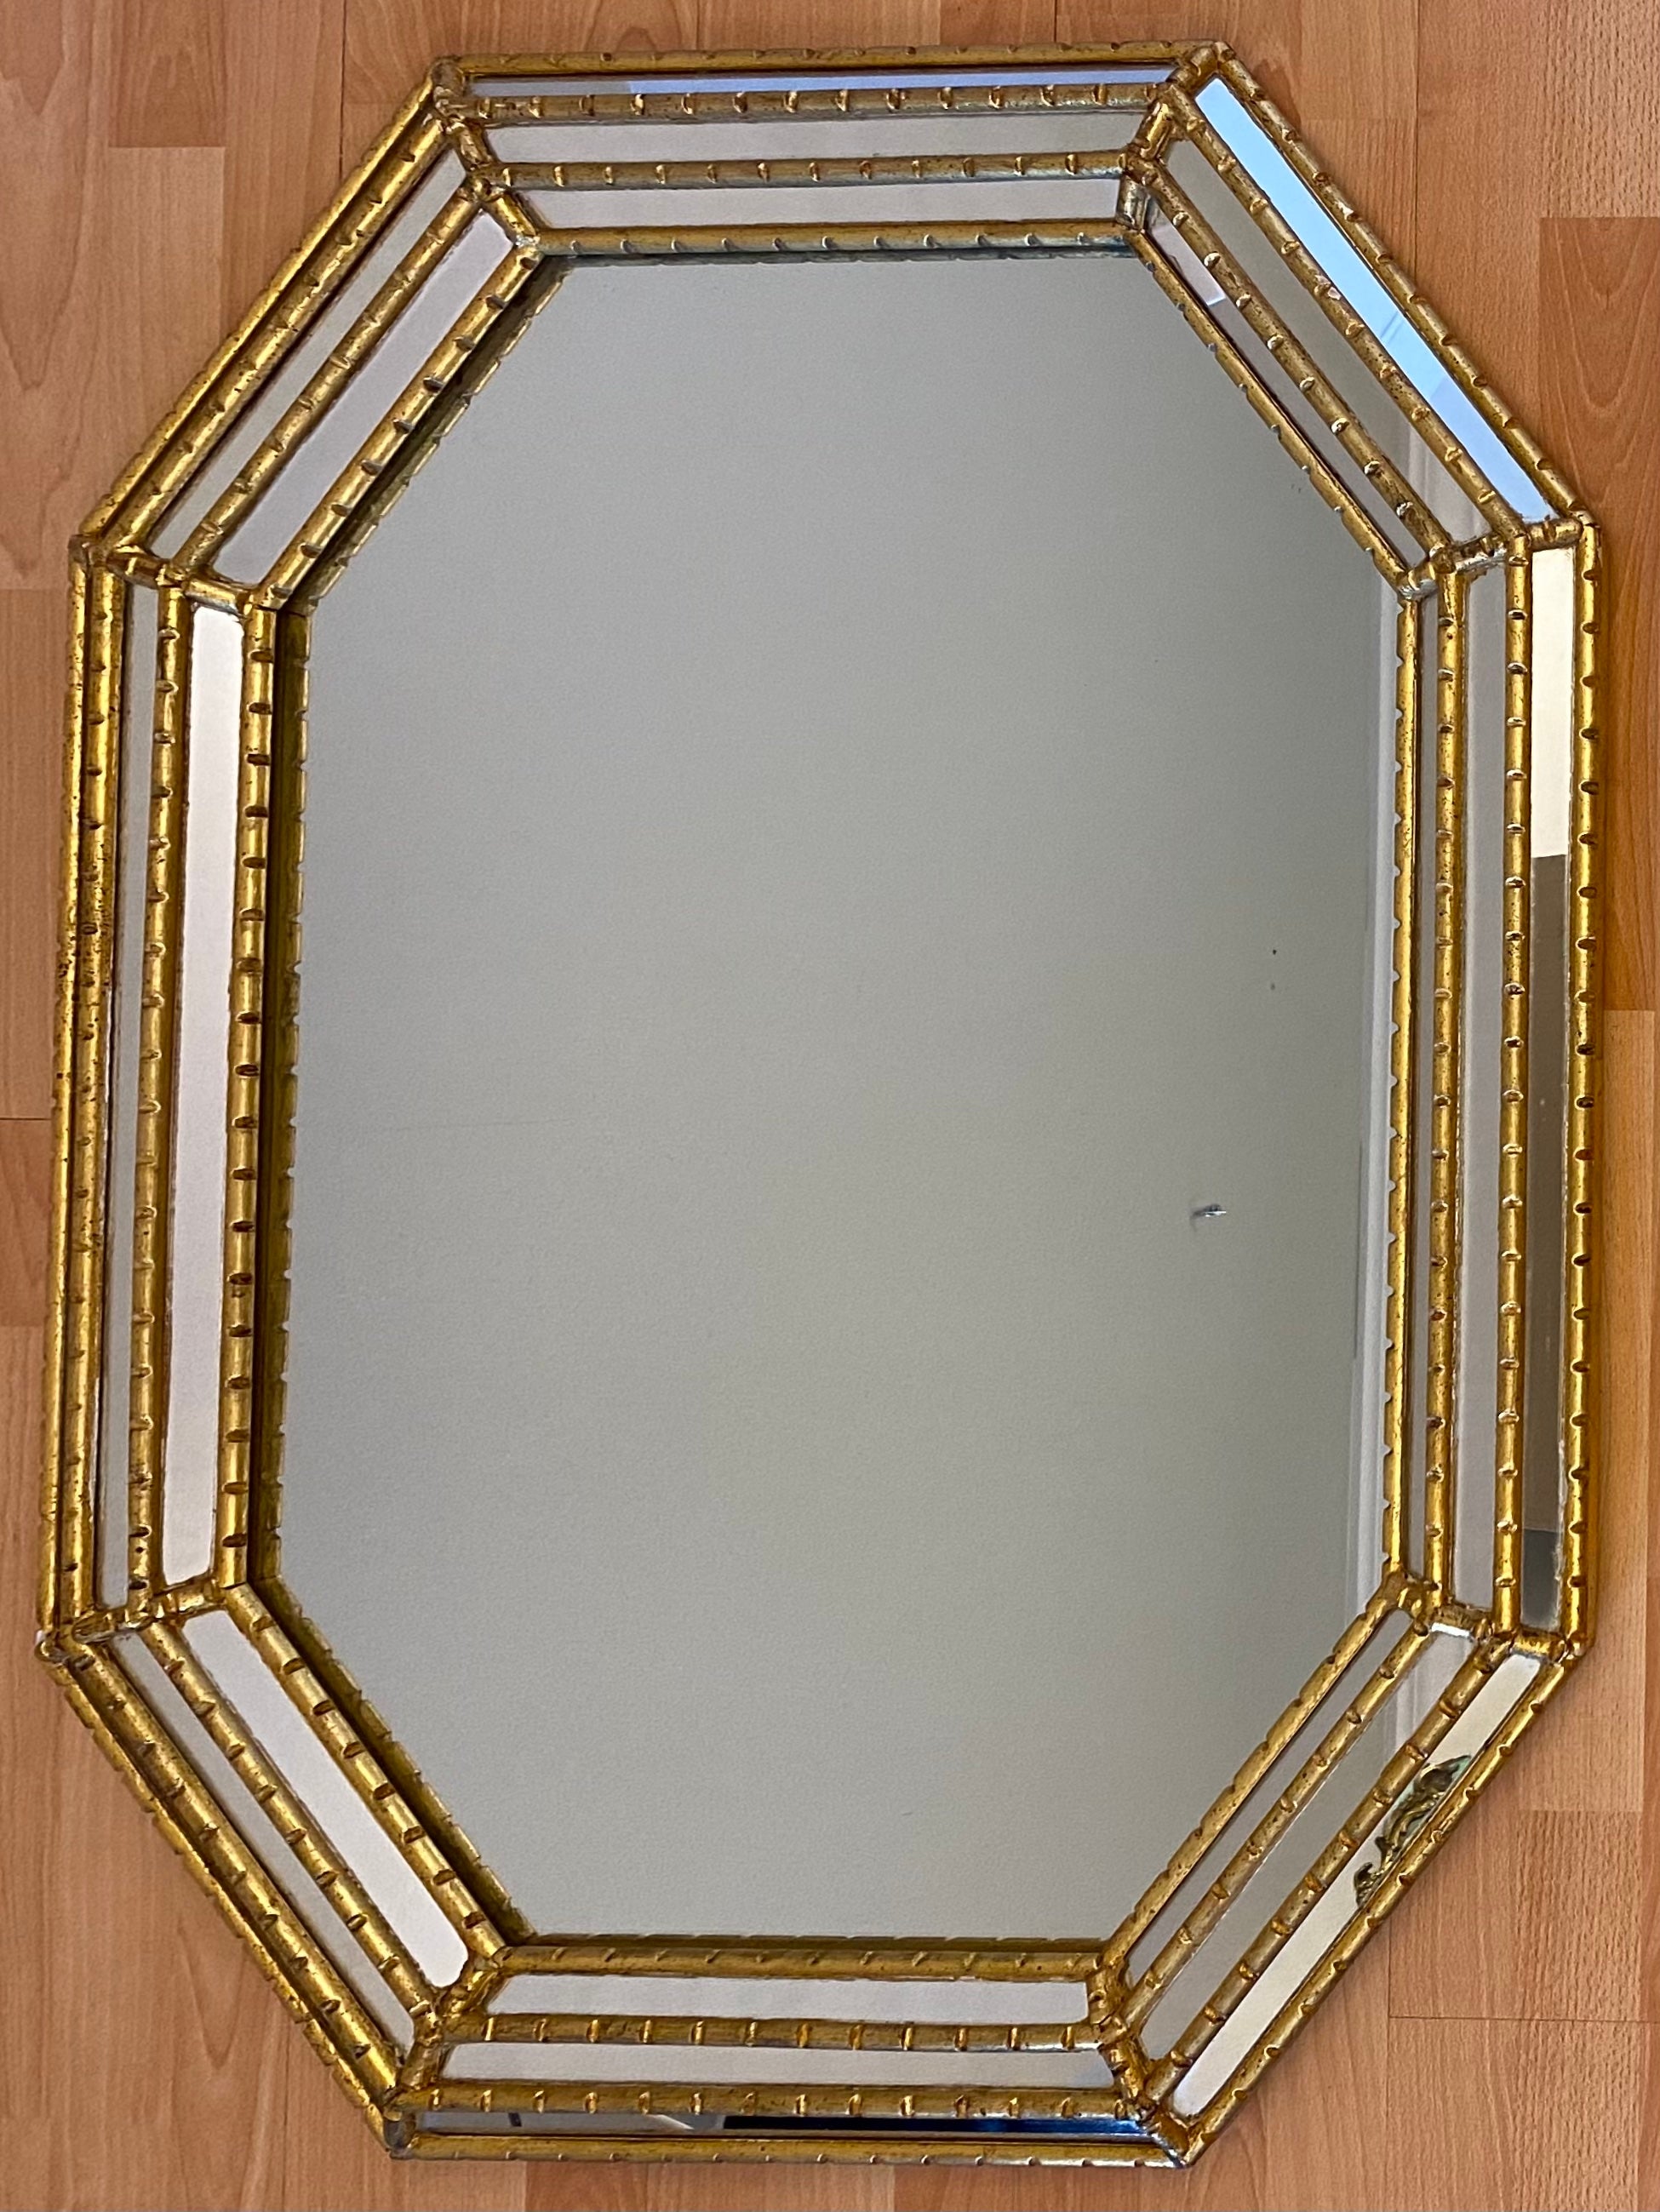 A fine quality octagonal gilt mirror featuring thick triple beveled edges and a wide frame. This is a beautiful and interesting shape, perfect for a hallway, entry above a console table or a vanity.

Solid wood and very well made piece. High end